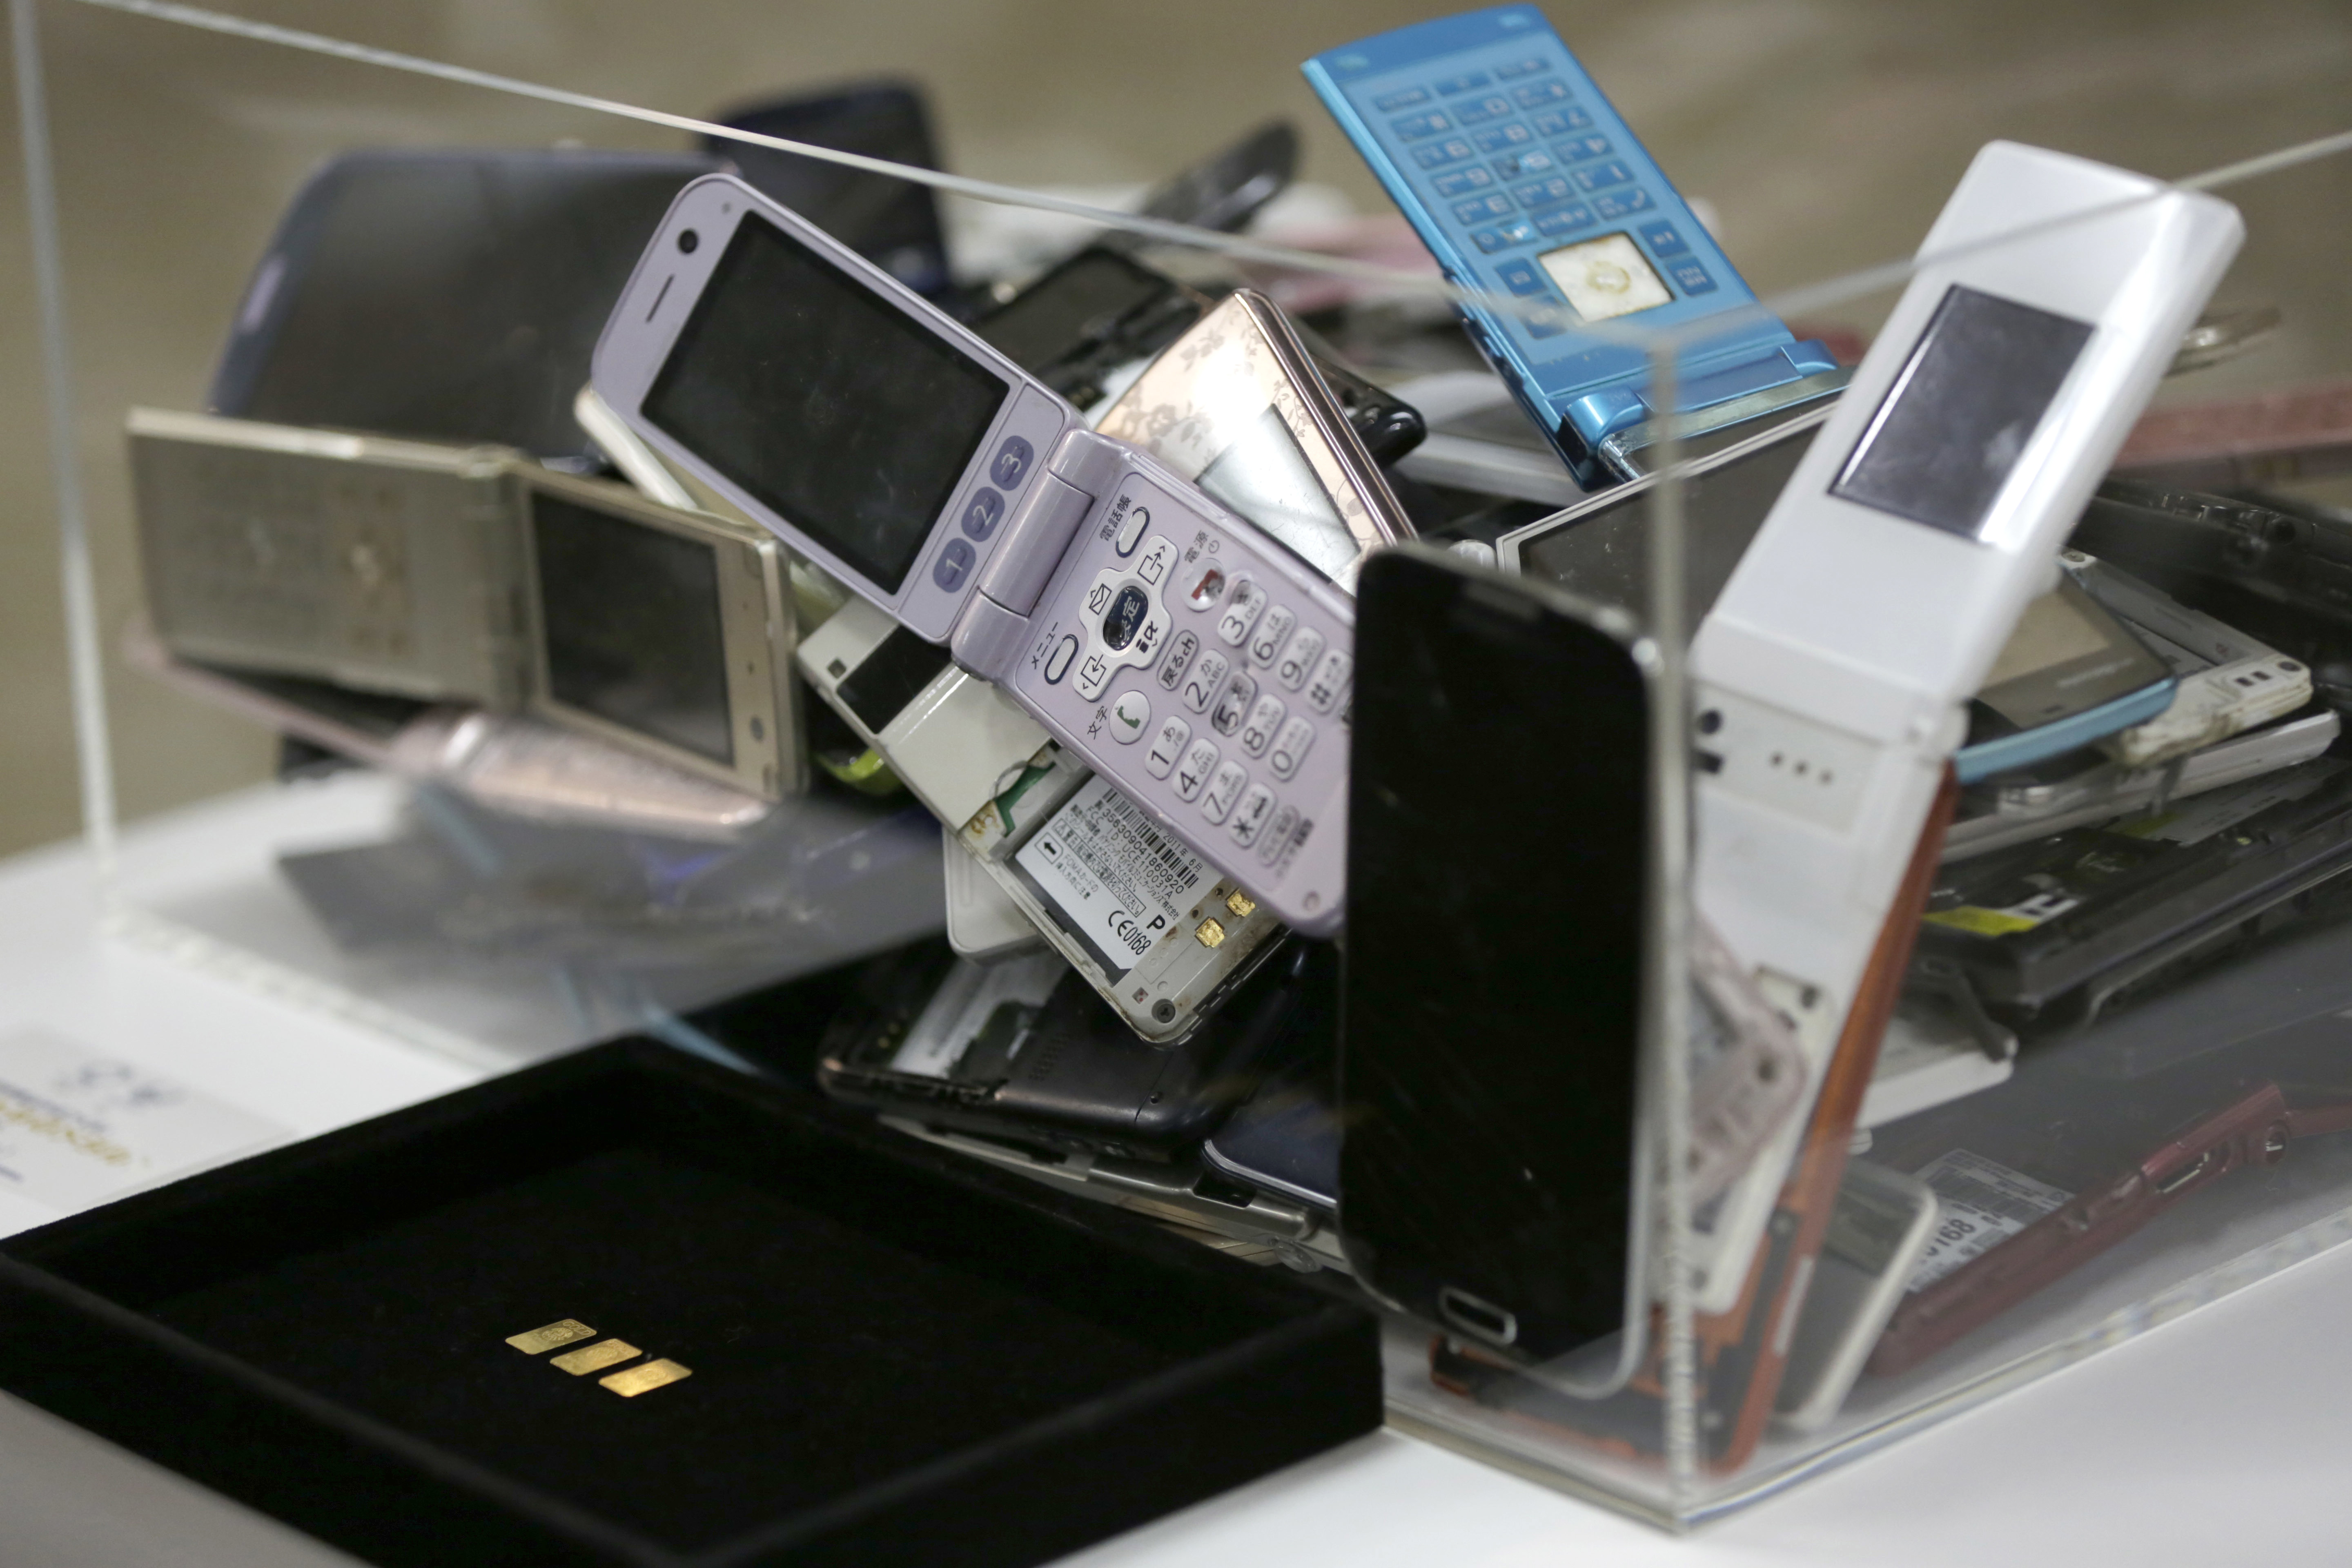 Gold tablets of 3 grams, left, which is able to be recycled from 100 mobile phones, are shown as example in Tokyo, Saturday, April 1, 2017. Organizers of the 2020 Tokyo Olympics began Saturday collecting discarded electronic devices that will be used in the production of the medals to be awarded to athletes. The organizing committee aims to collect eight tons of raw metal which will yield around two tons of pure metal, enough to produce 5,000 medals for the Tokyo Games. (AP Photo/Eugene Hoshiko)